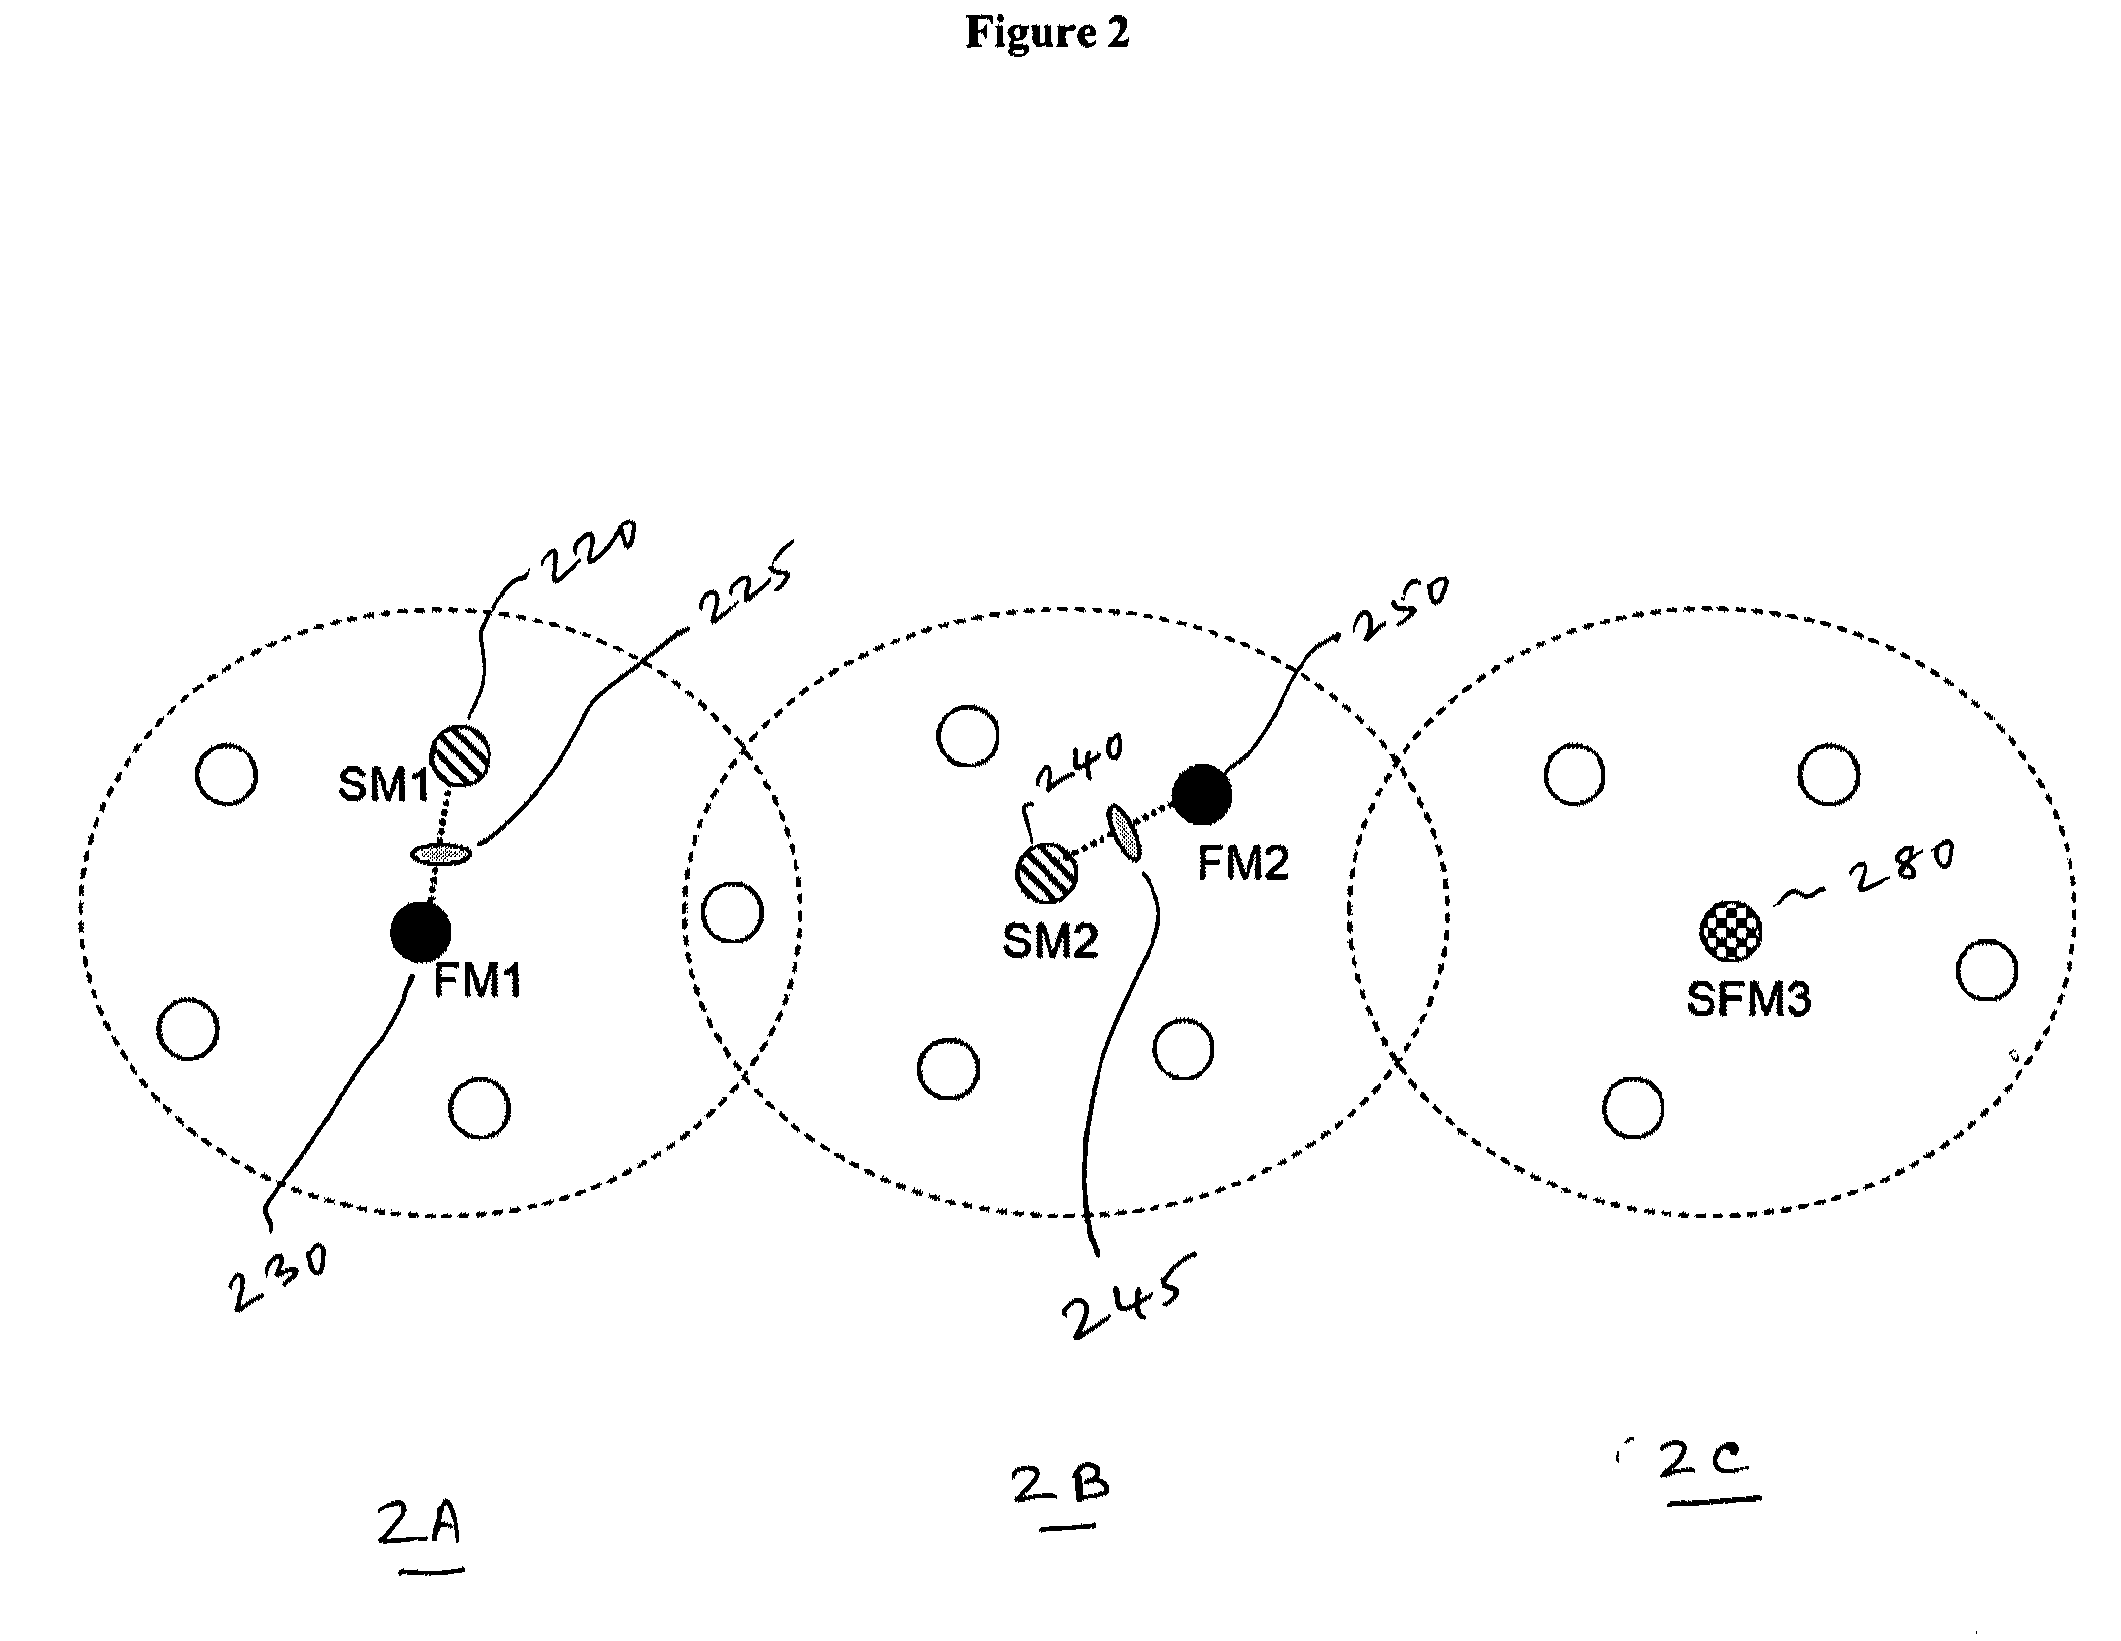 High performance data transport system and method